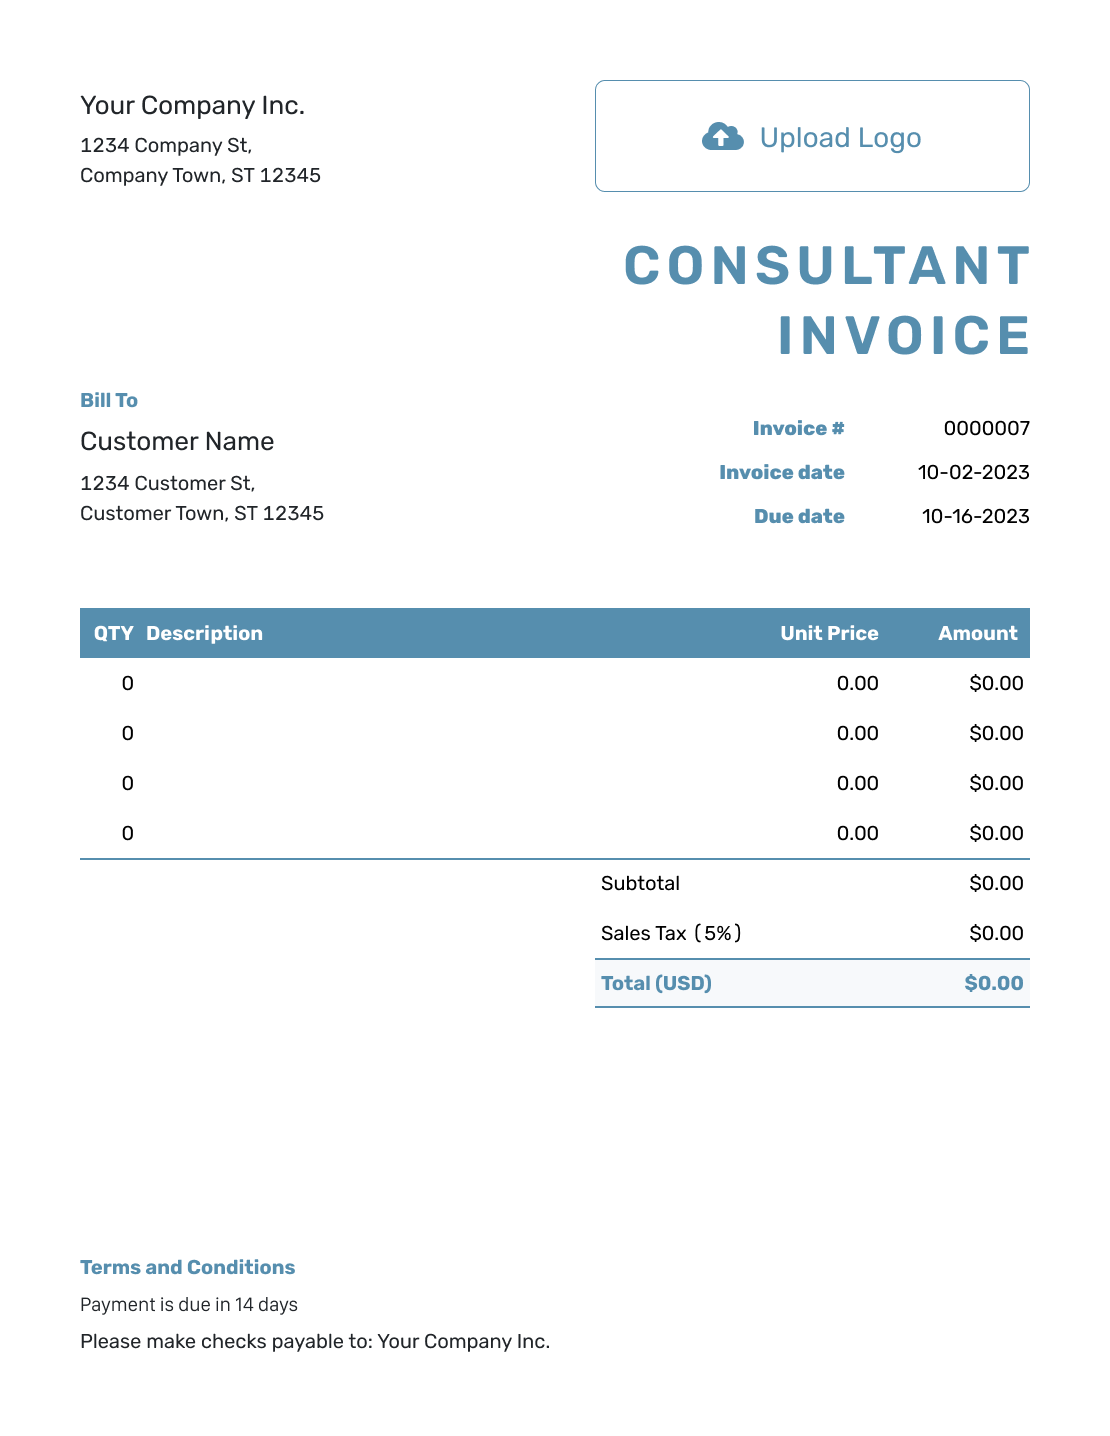 Blank Consultant Invoice Template